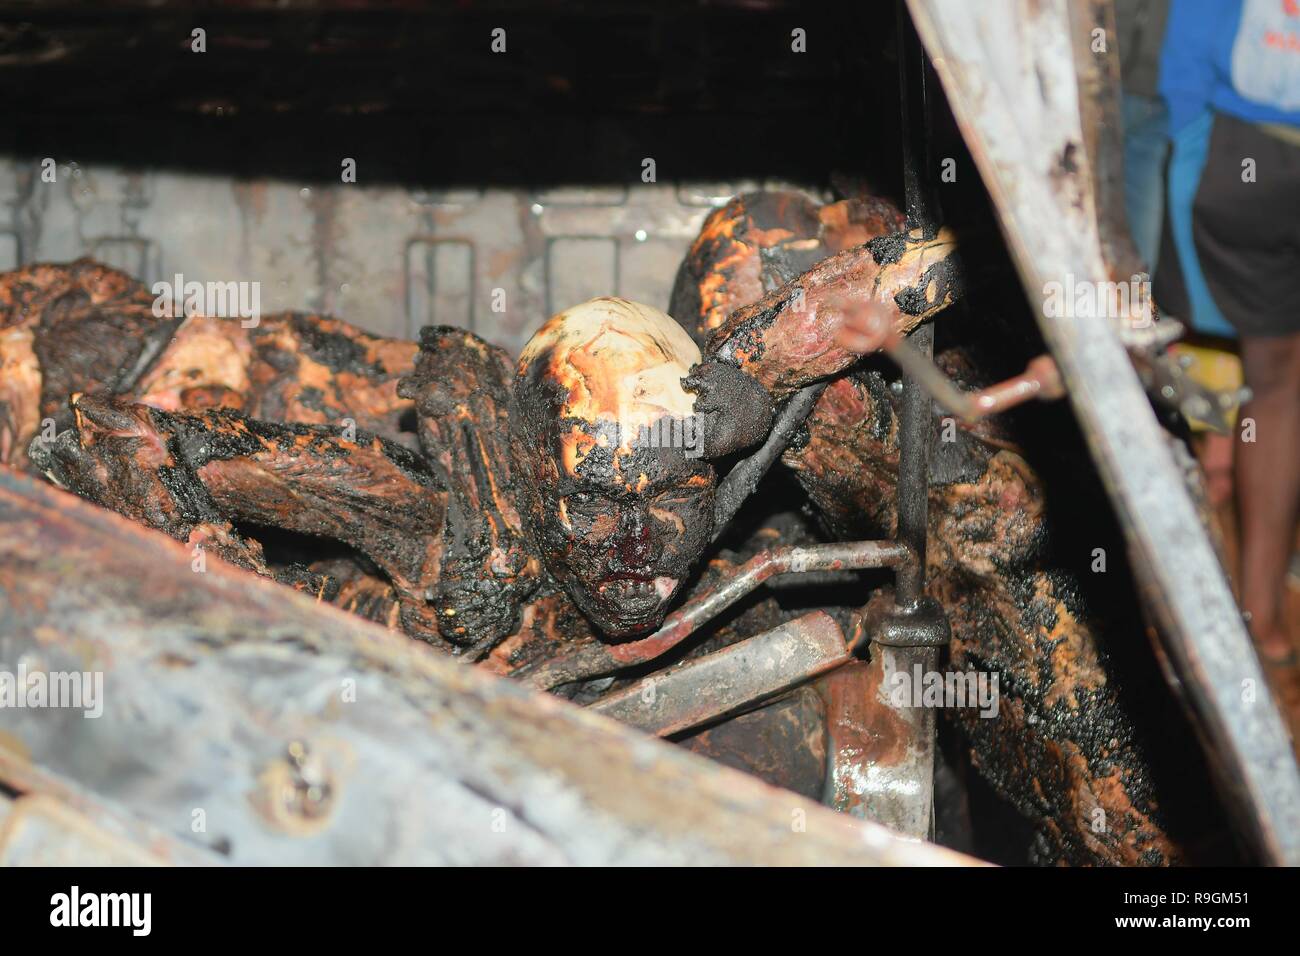 (EDITOR'S NOTE: IMAGE DEPICTS DEATH) Burnt bodies seen at the scene of the accident. Tragic road mishap at Amtali, 3 charred to death, 4 injured when two vehicles crushed face on resulting into a fire. Stock Photo